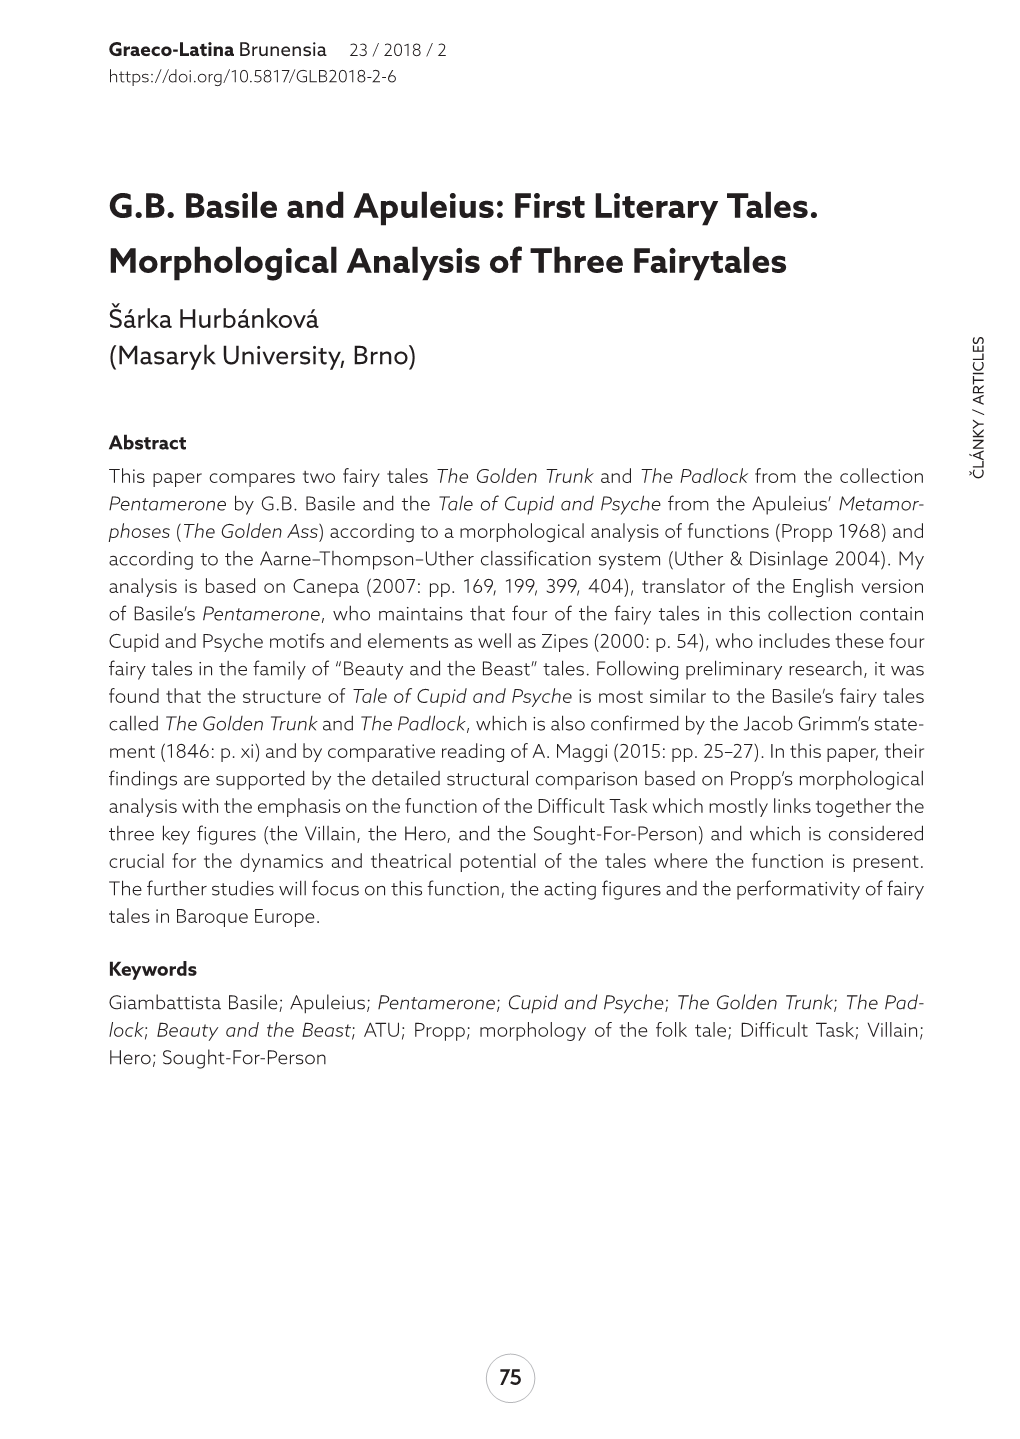 G.B. Basile and Apuleius: First Literary Tales. Morphological Analysis of Three Fairytales